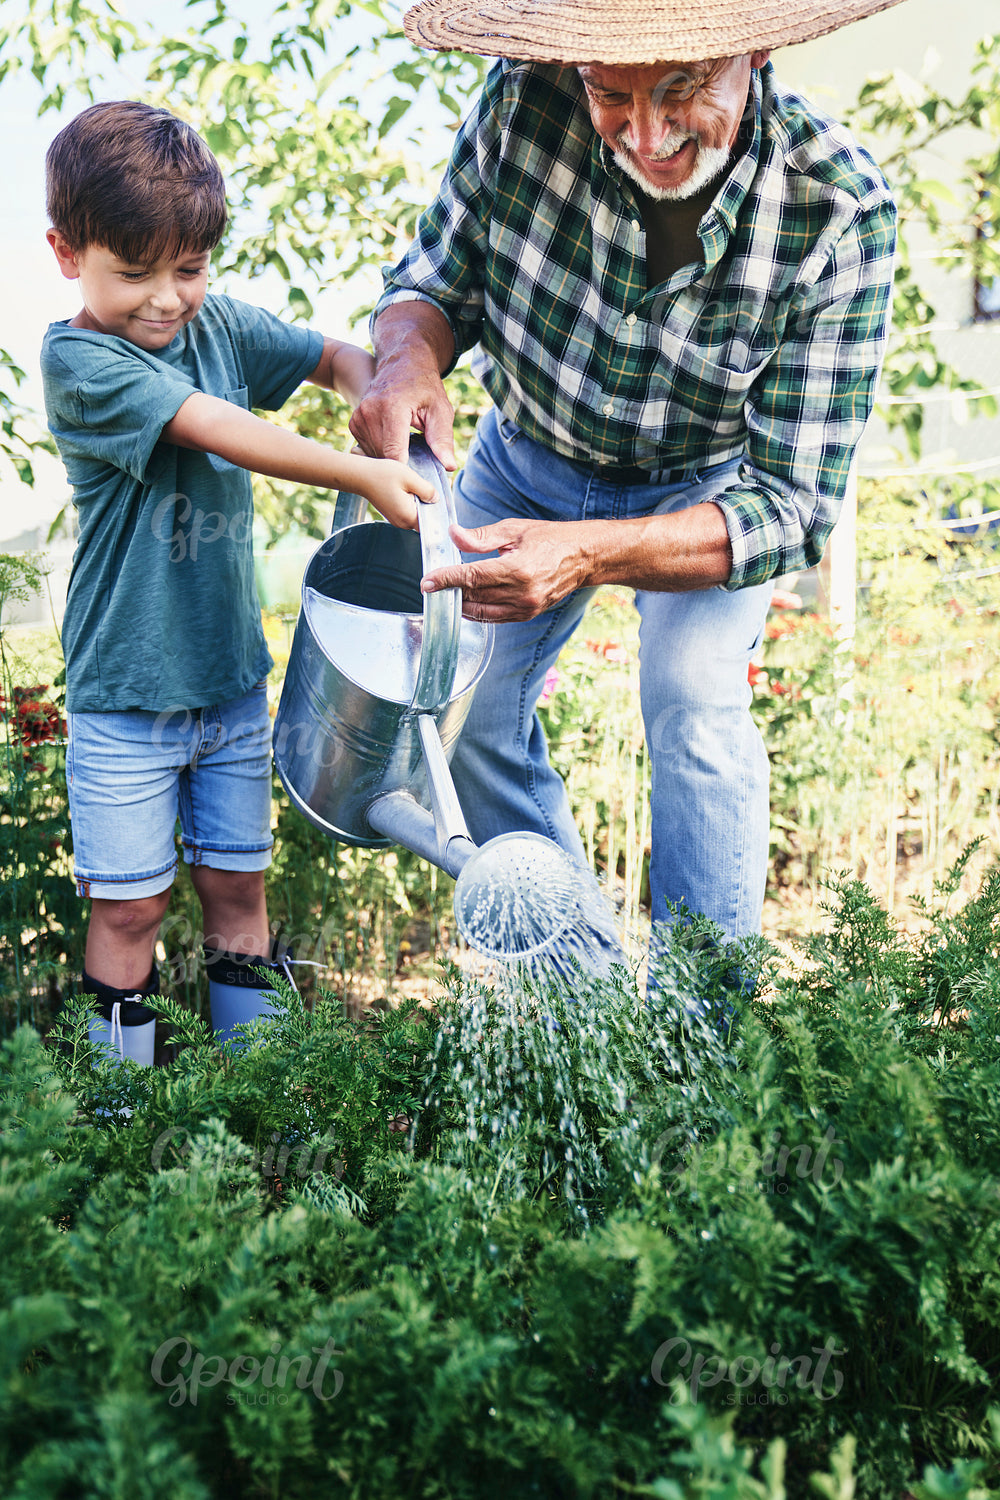 Grandfather with grandson watering vegetables in the garden